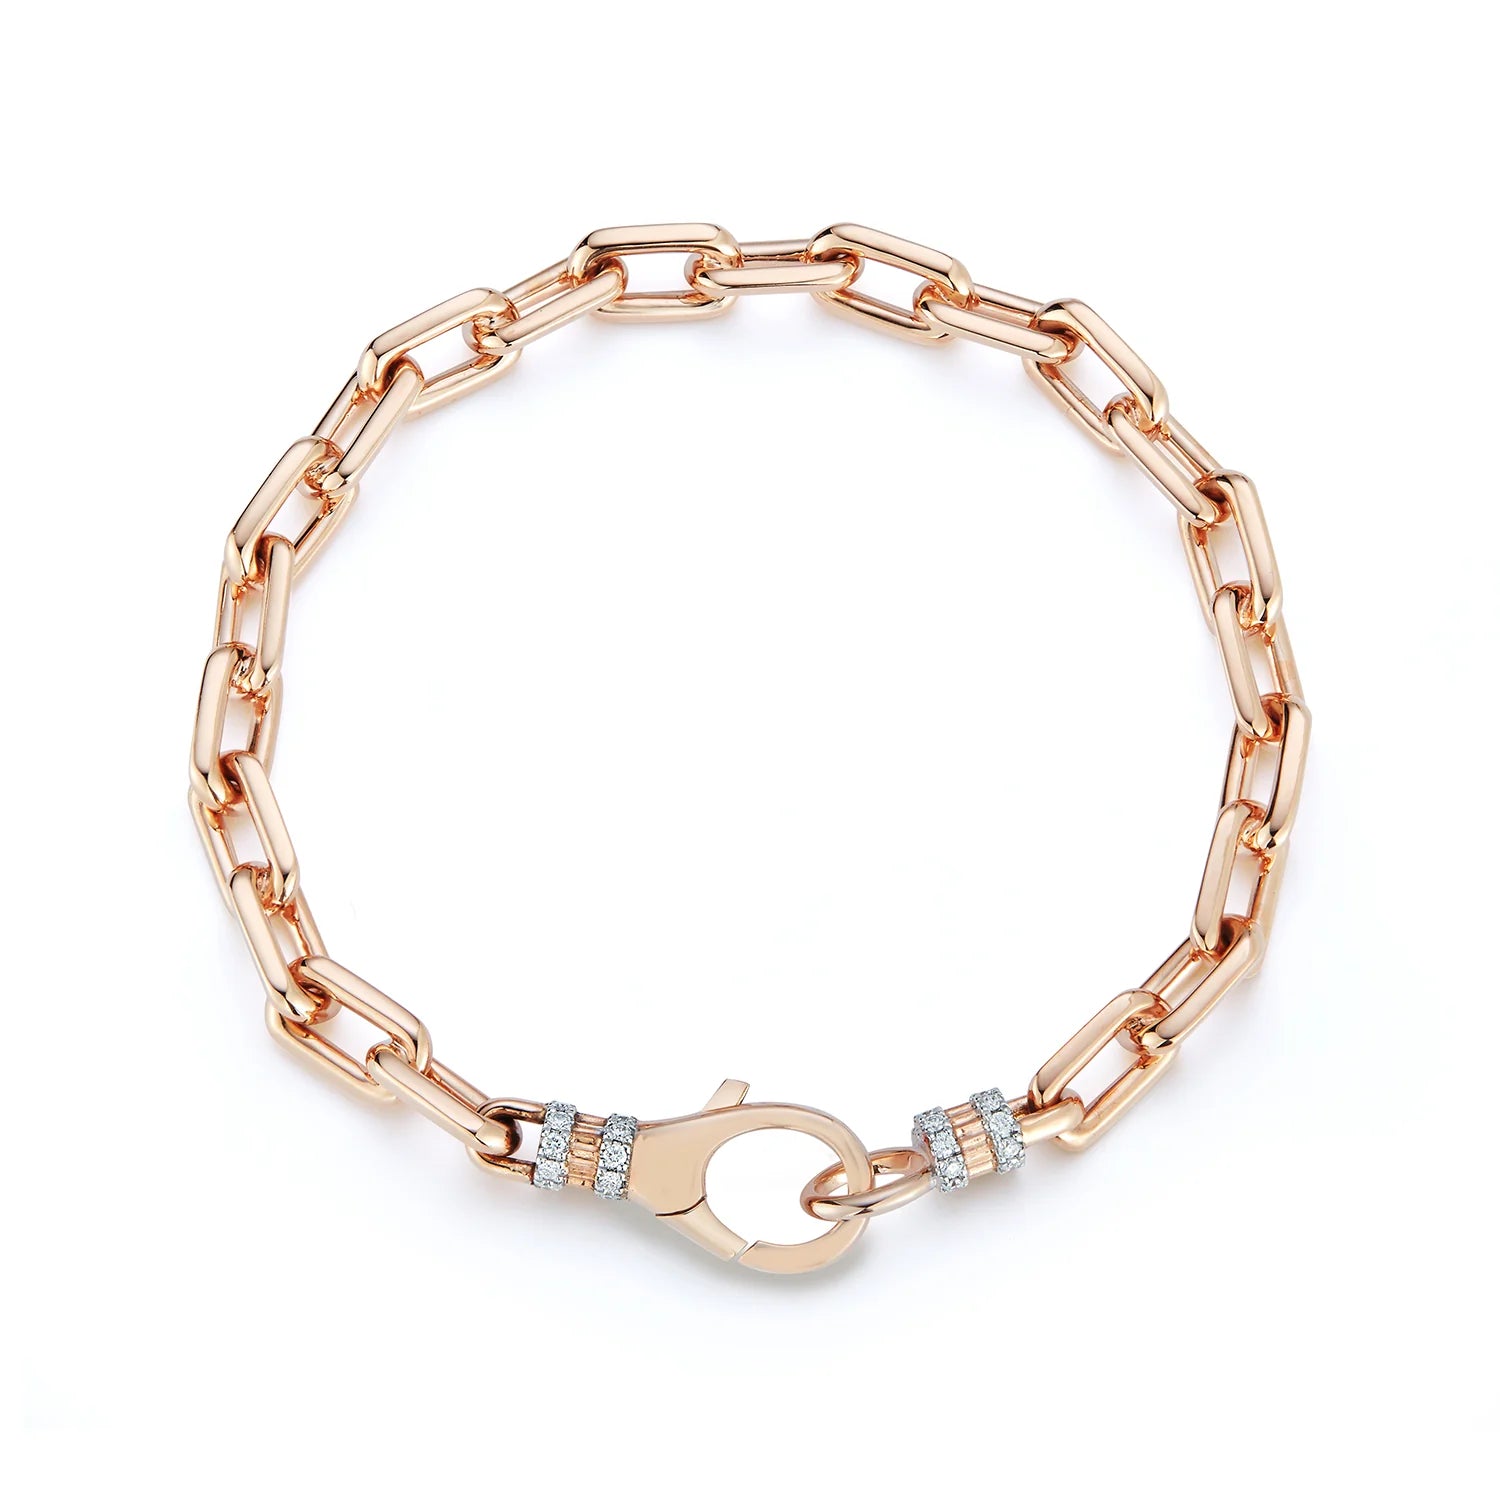 Clive Chain Link Bracelet with Diamond Clasp